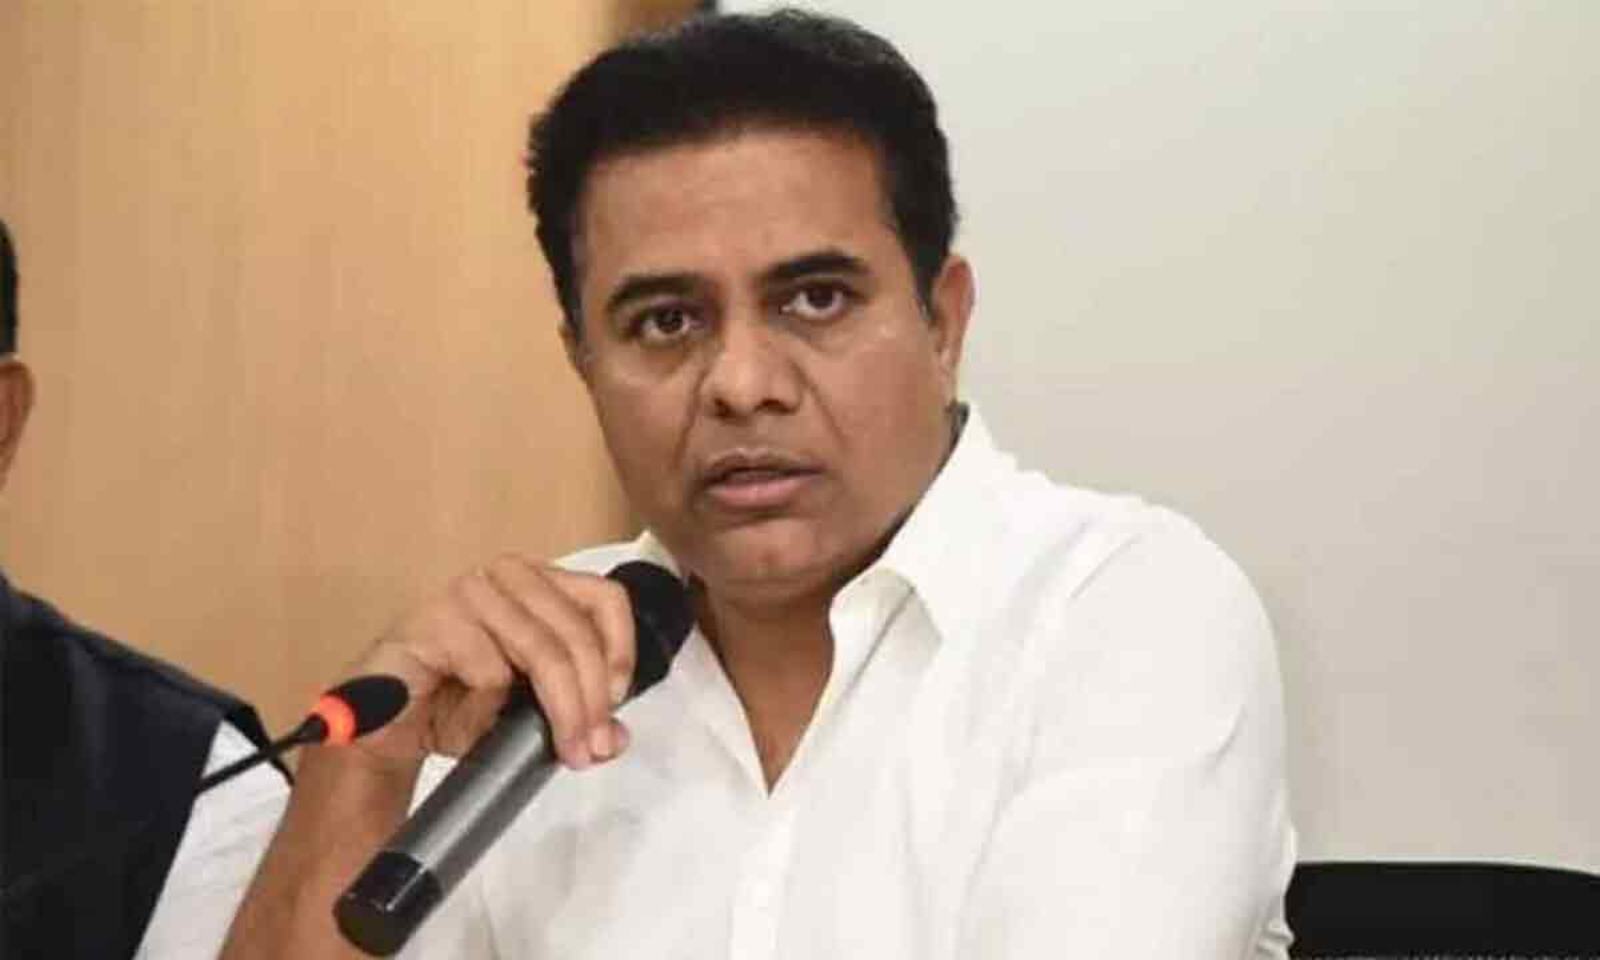 Industries Minister KT Rama Rao says Telangana Government promotes three I’s of Innovation, Infrastructure and Inclusive Growth